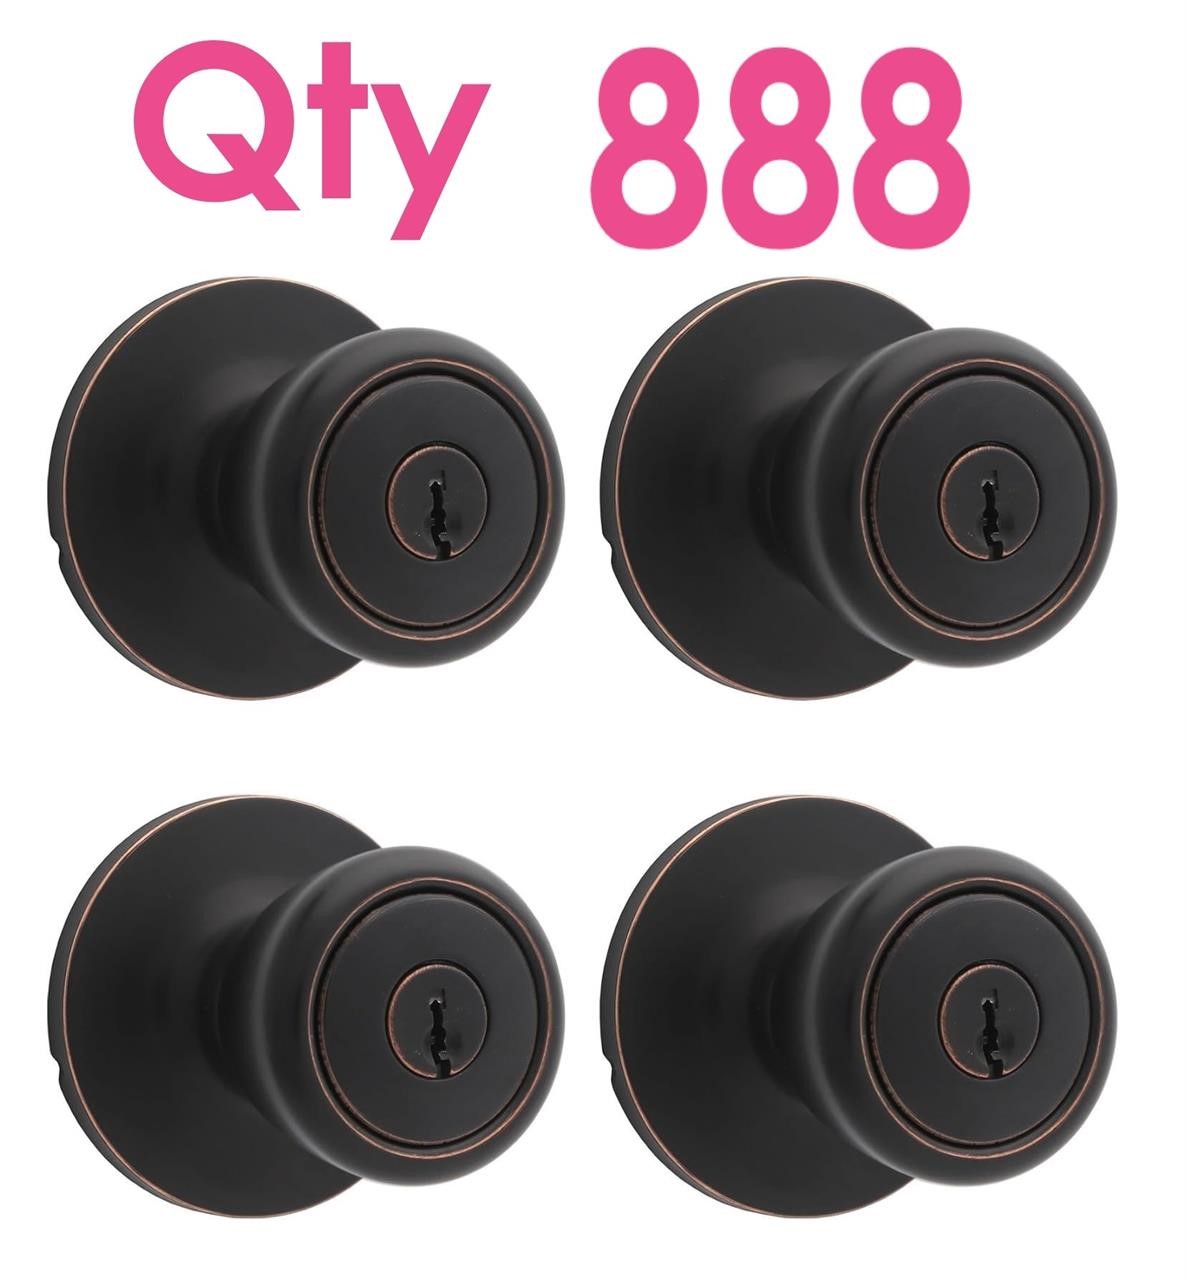 Qty 888- Entry Door Knobs